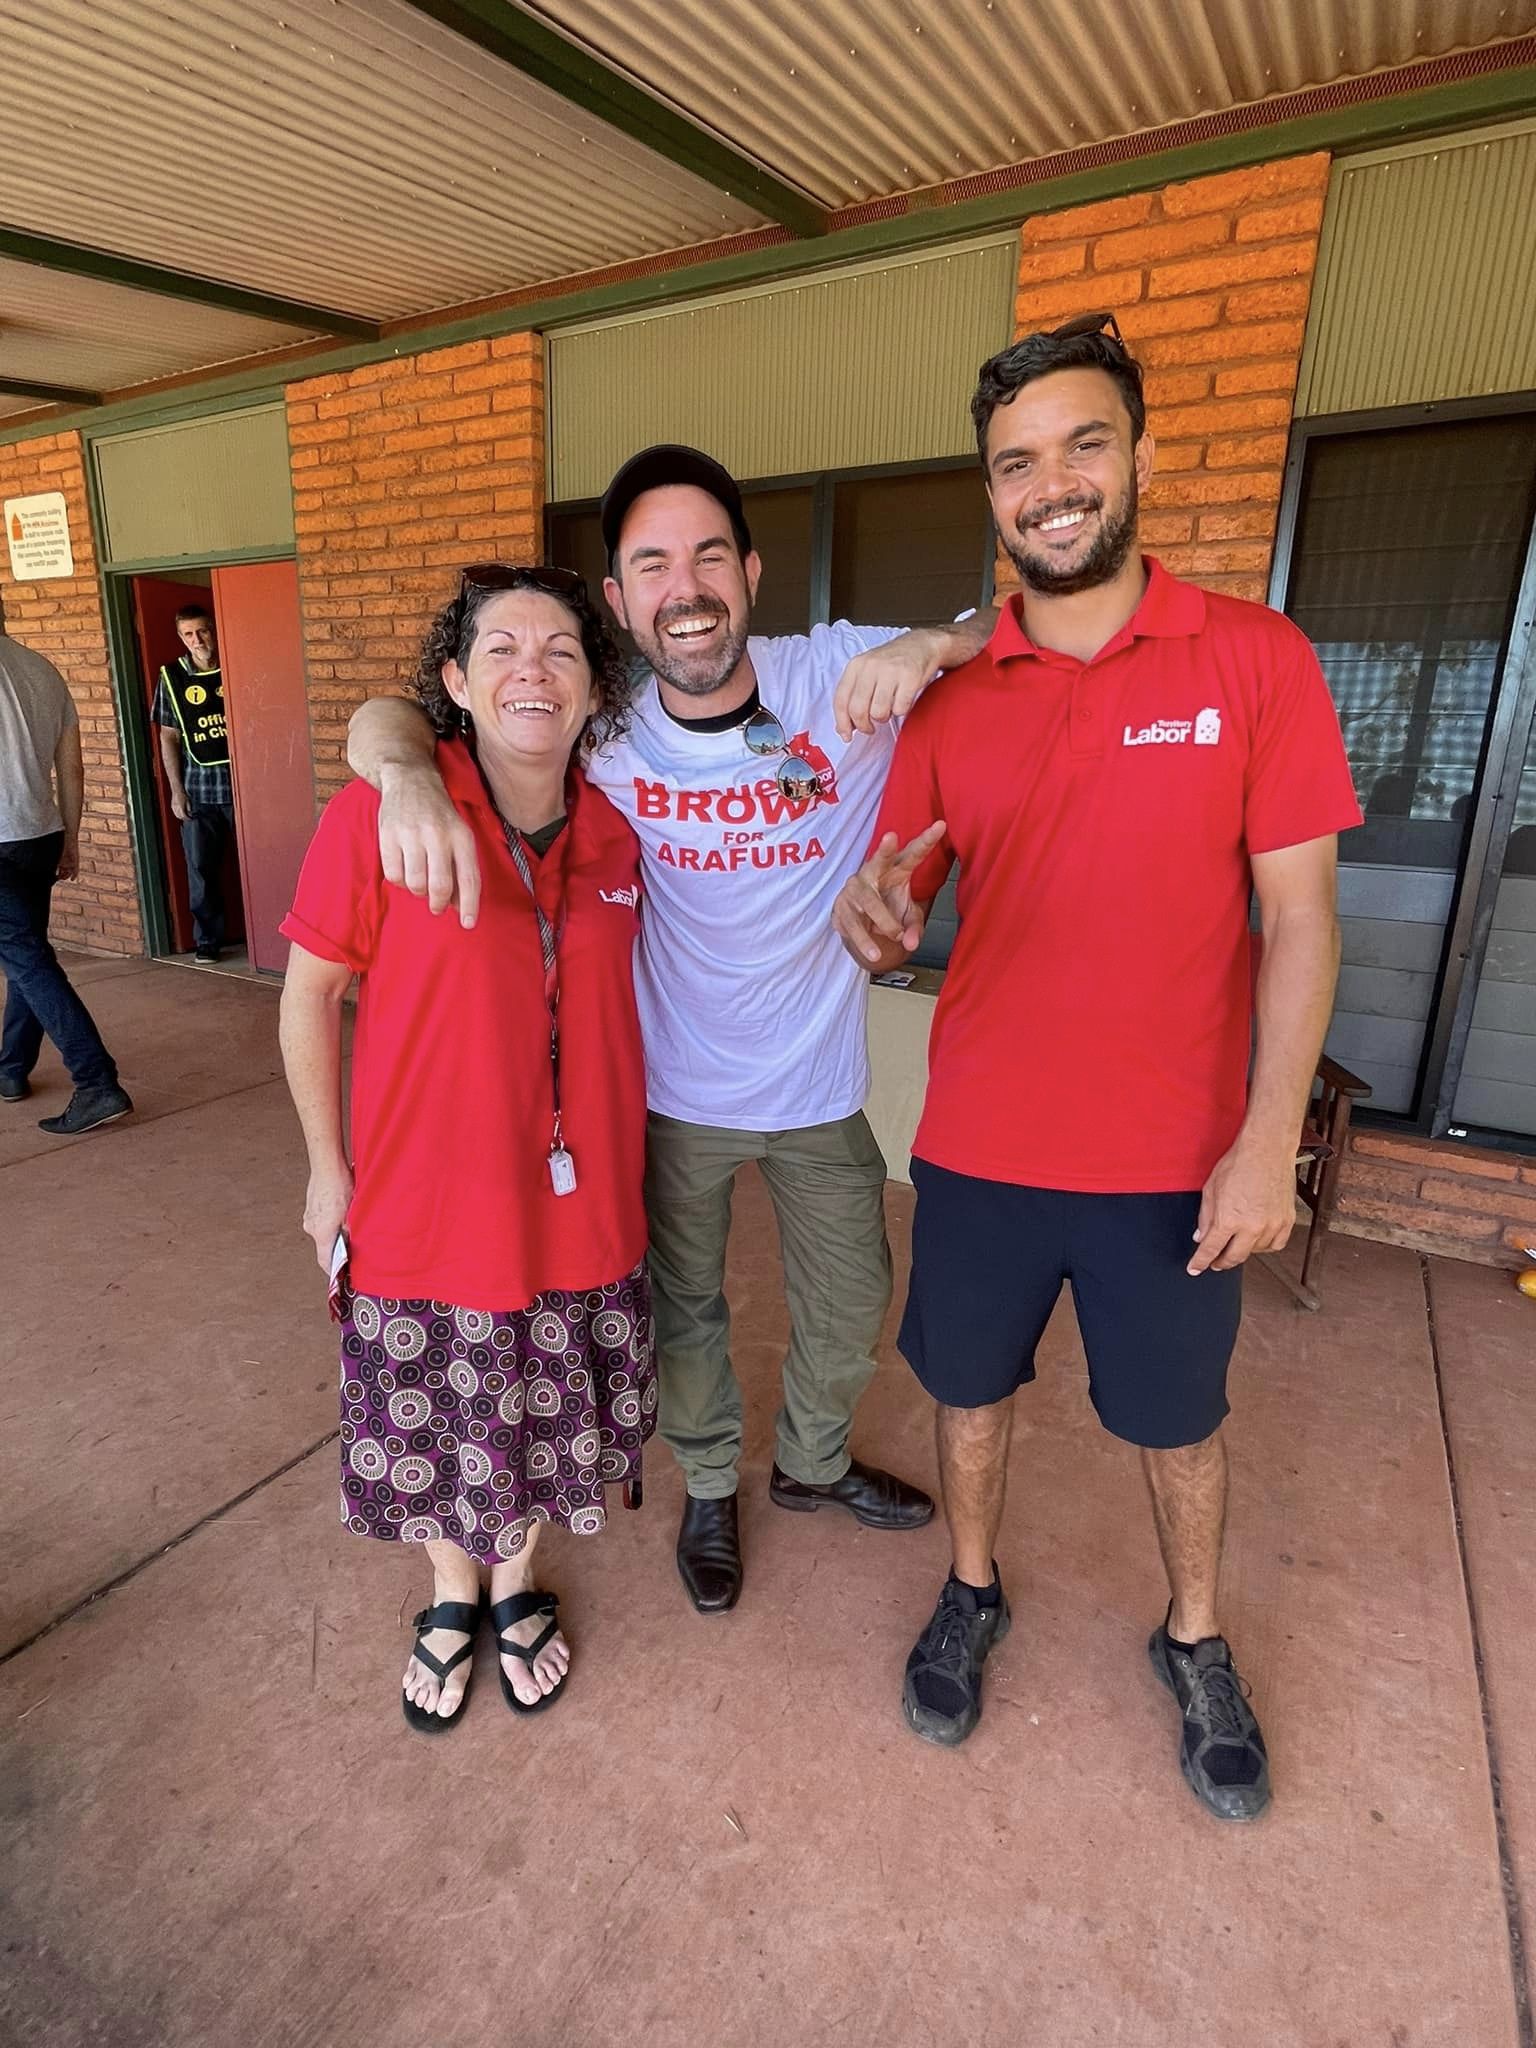 Territory Labor: What a great response from the people of Arafura today for Manuel…